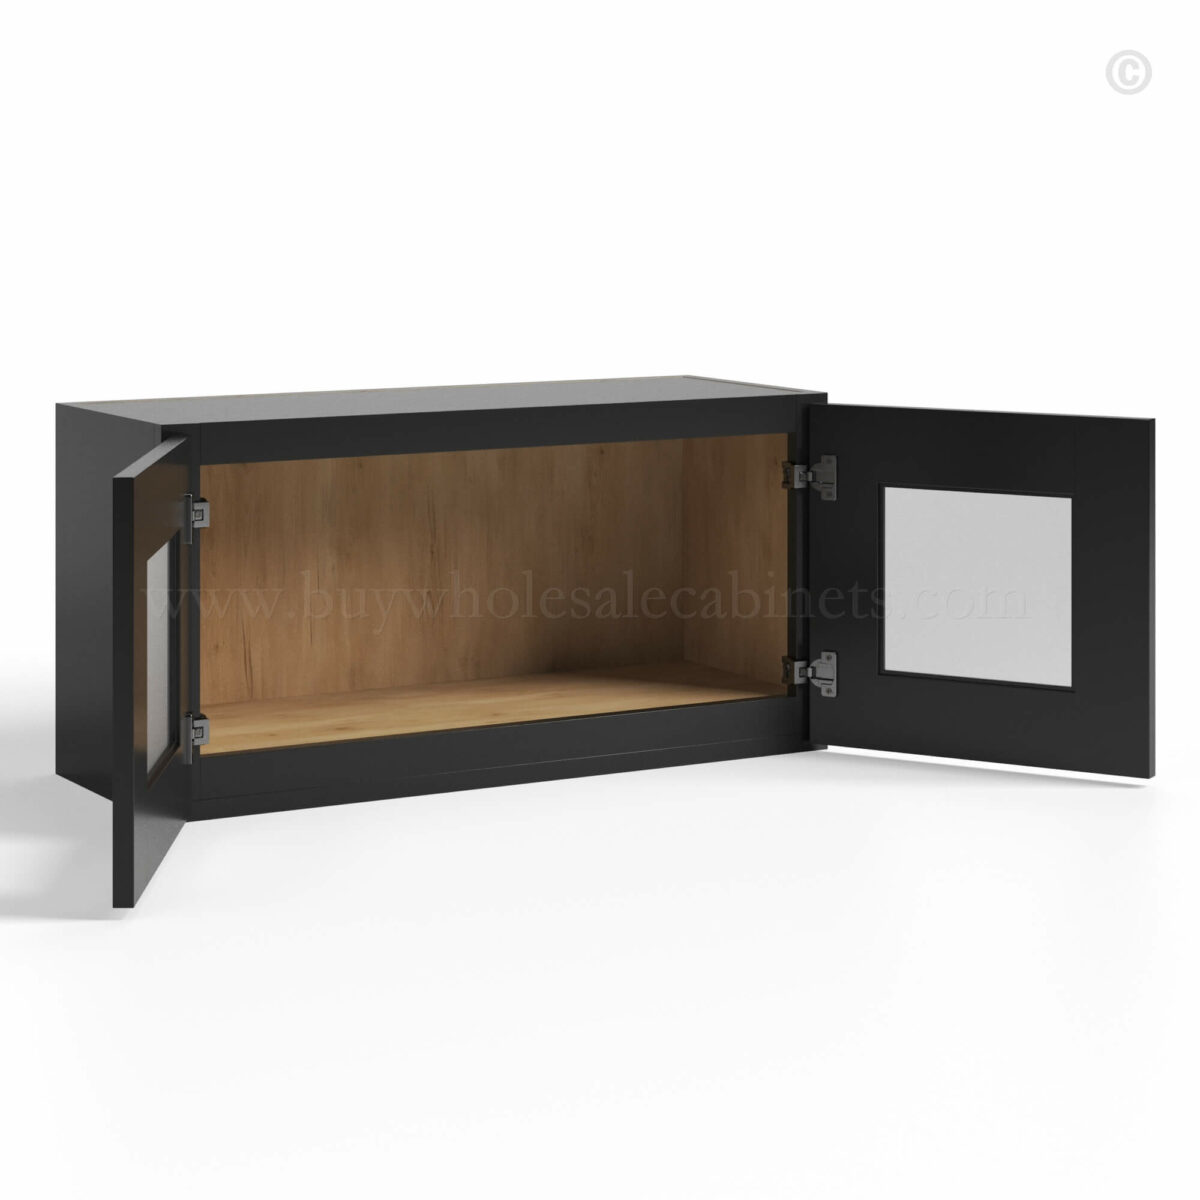 Black Shaker Double Glass Door Wall Cabinets, rta cabinets, wholesale cabinets